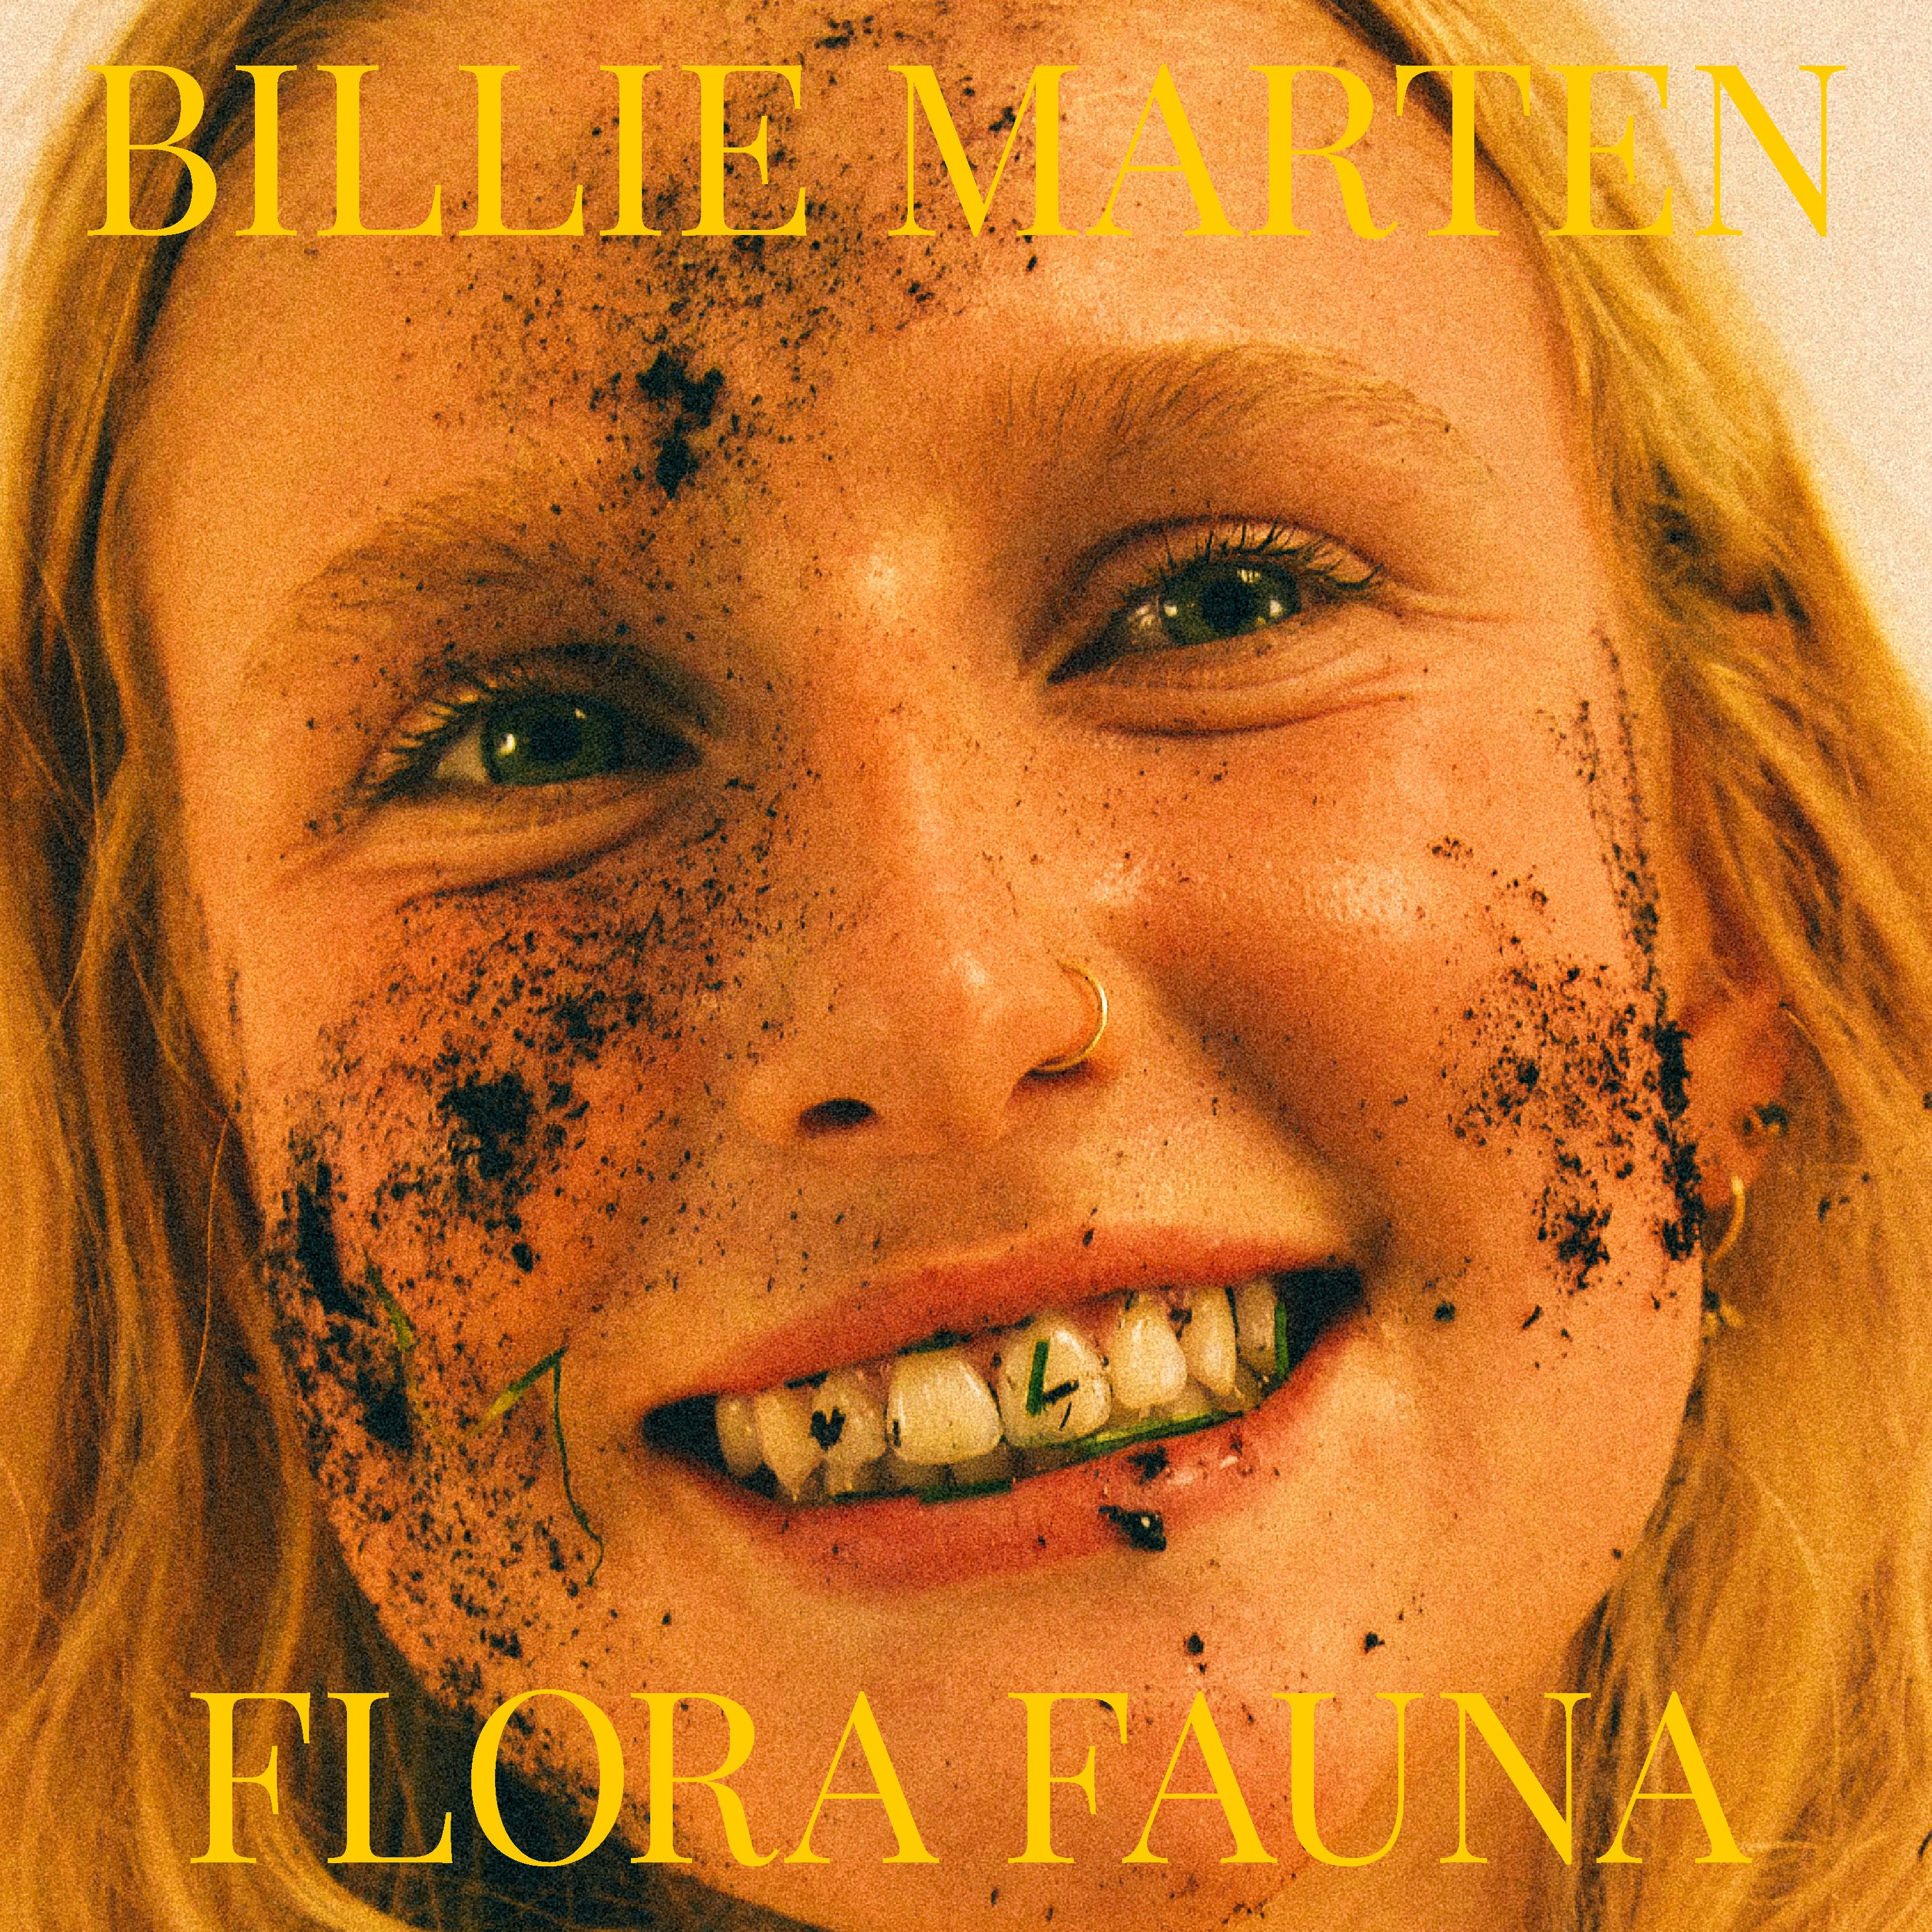 ‘Flora Fauna’ is spiked with punch and grunge